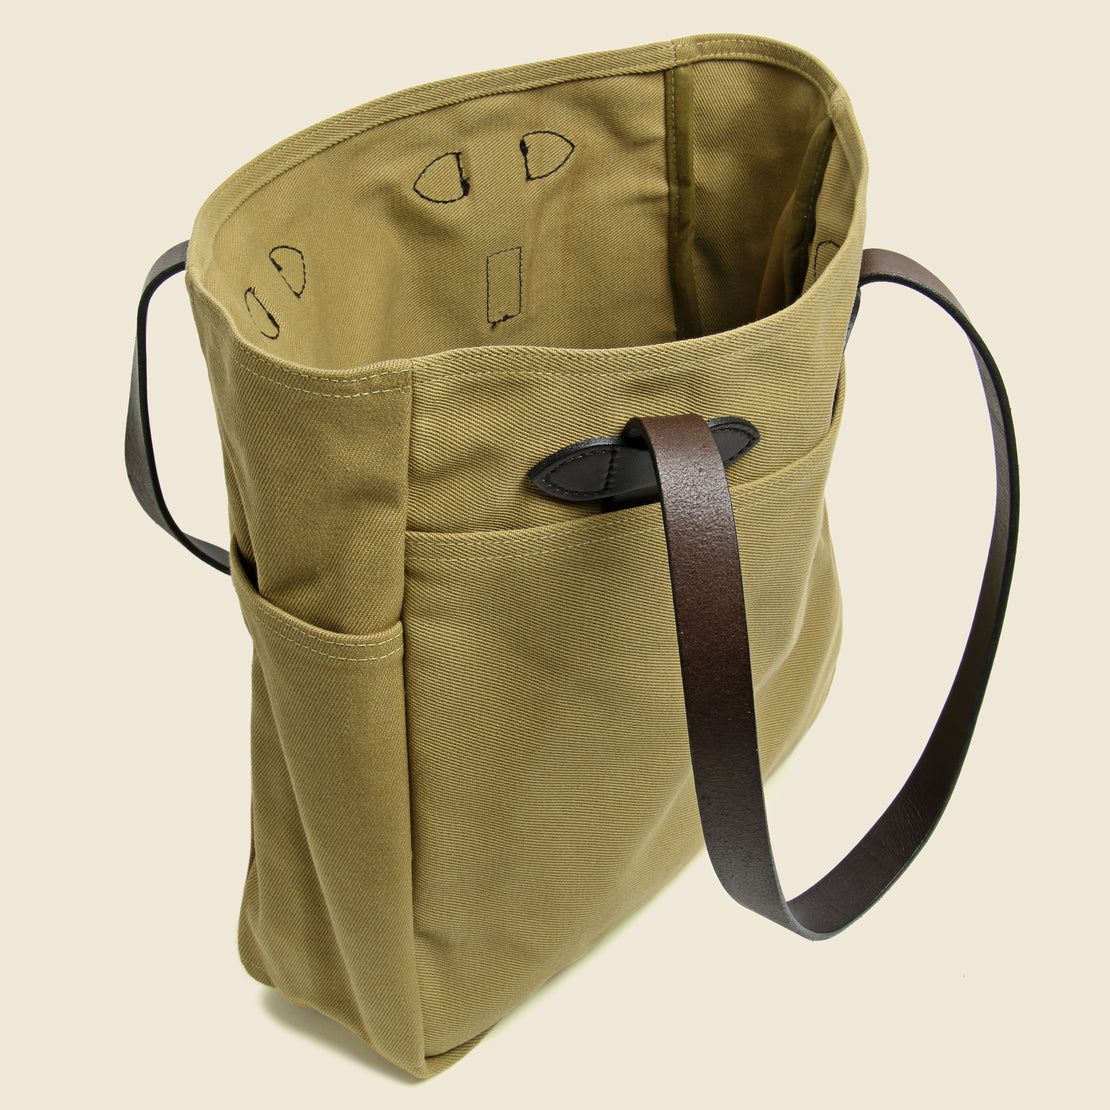 Rugged Twill Tote Bag - Tan - Filson - STAG Provisions - W - Accessories - Bag